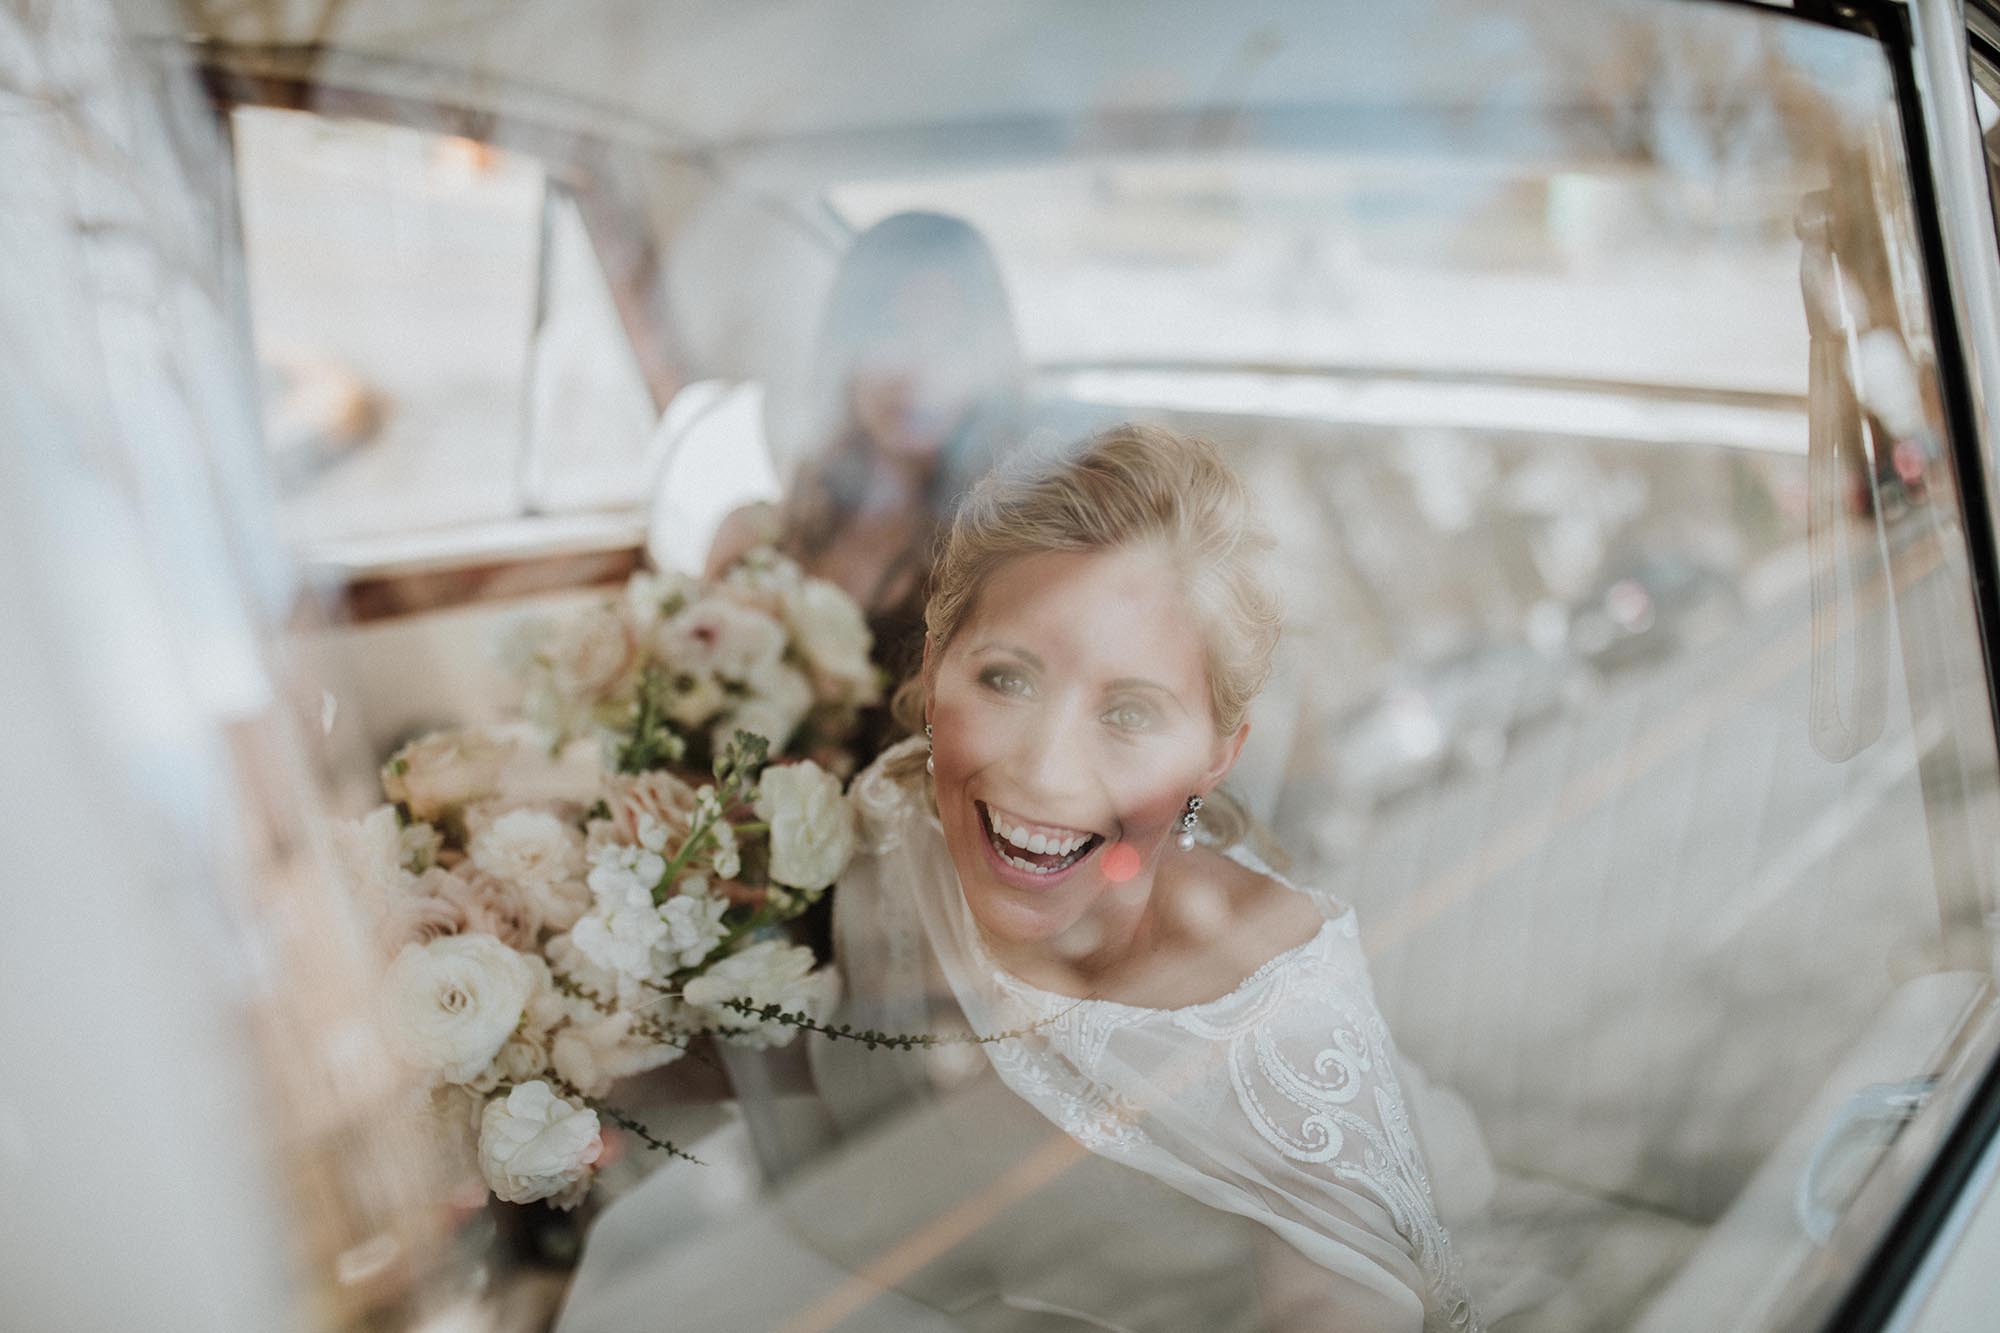 Entrepots Dominion Wedding In Montreal - Bride and groom relax in luxury car - Wedding Photographer Brent Calis